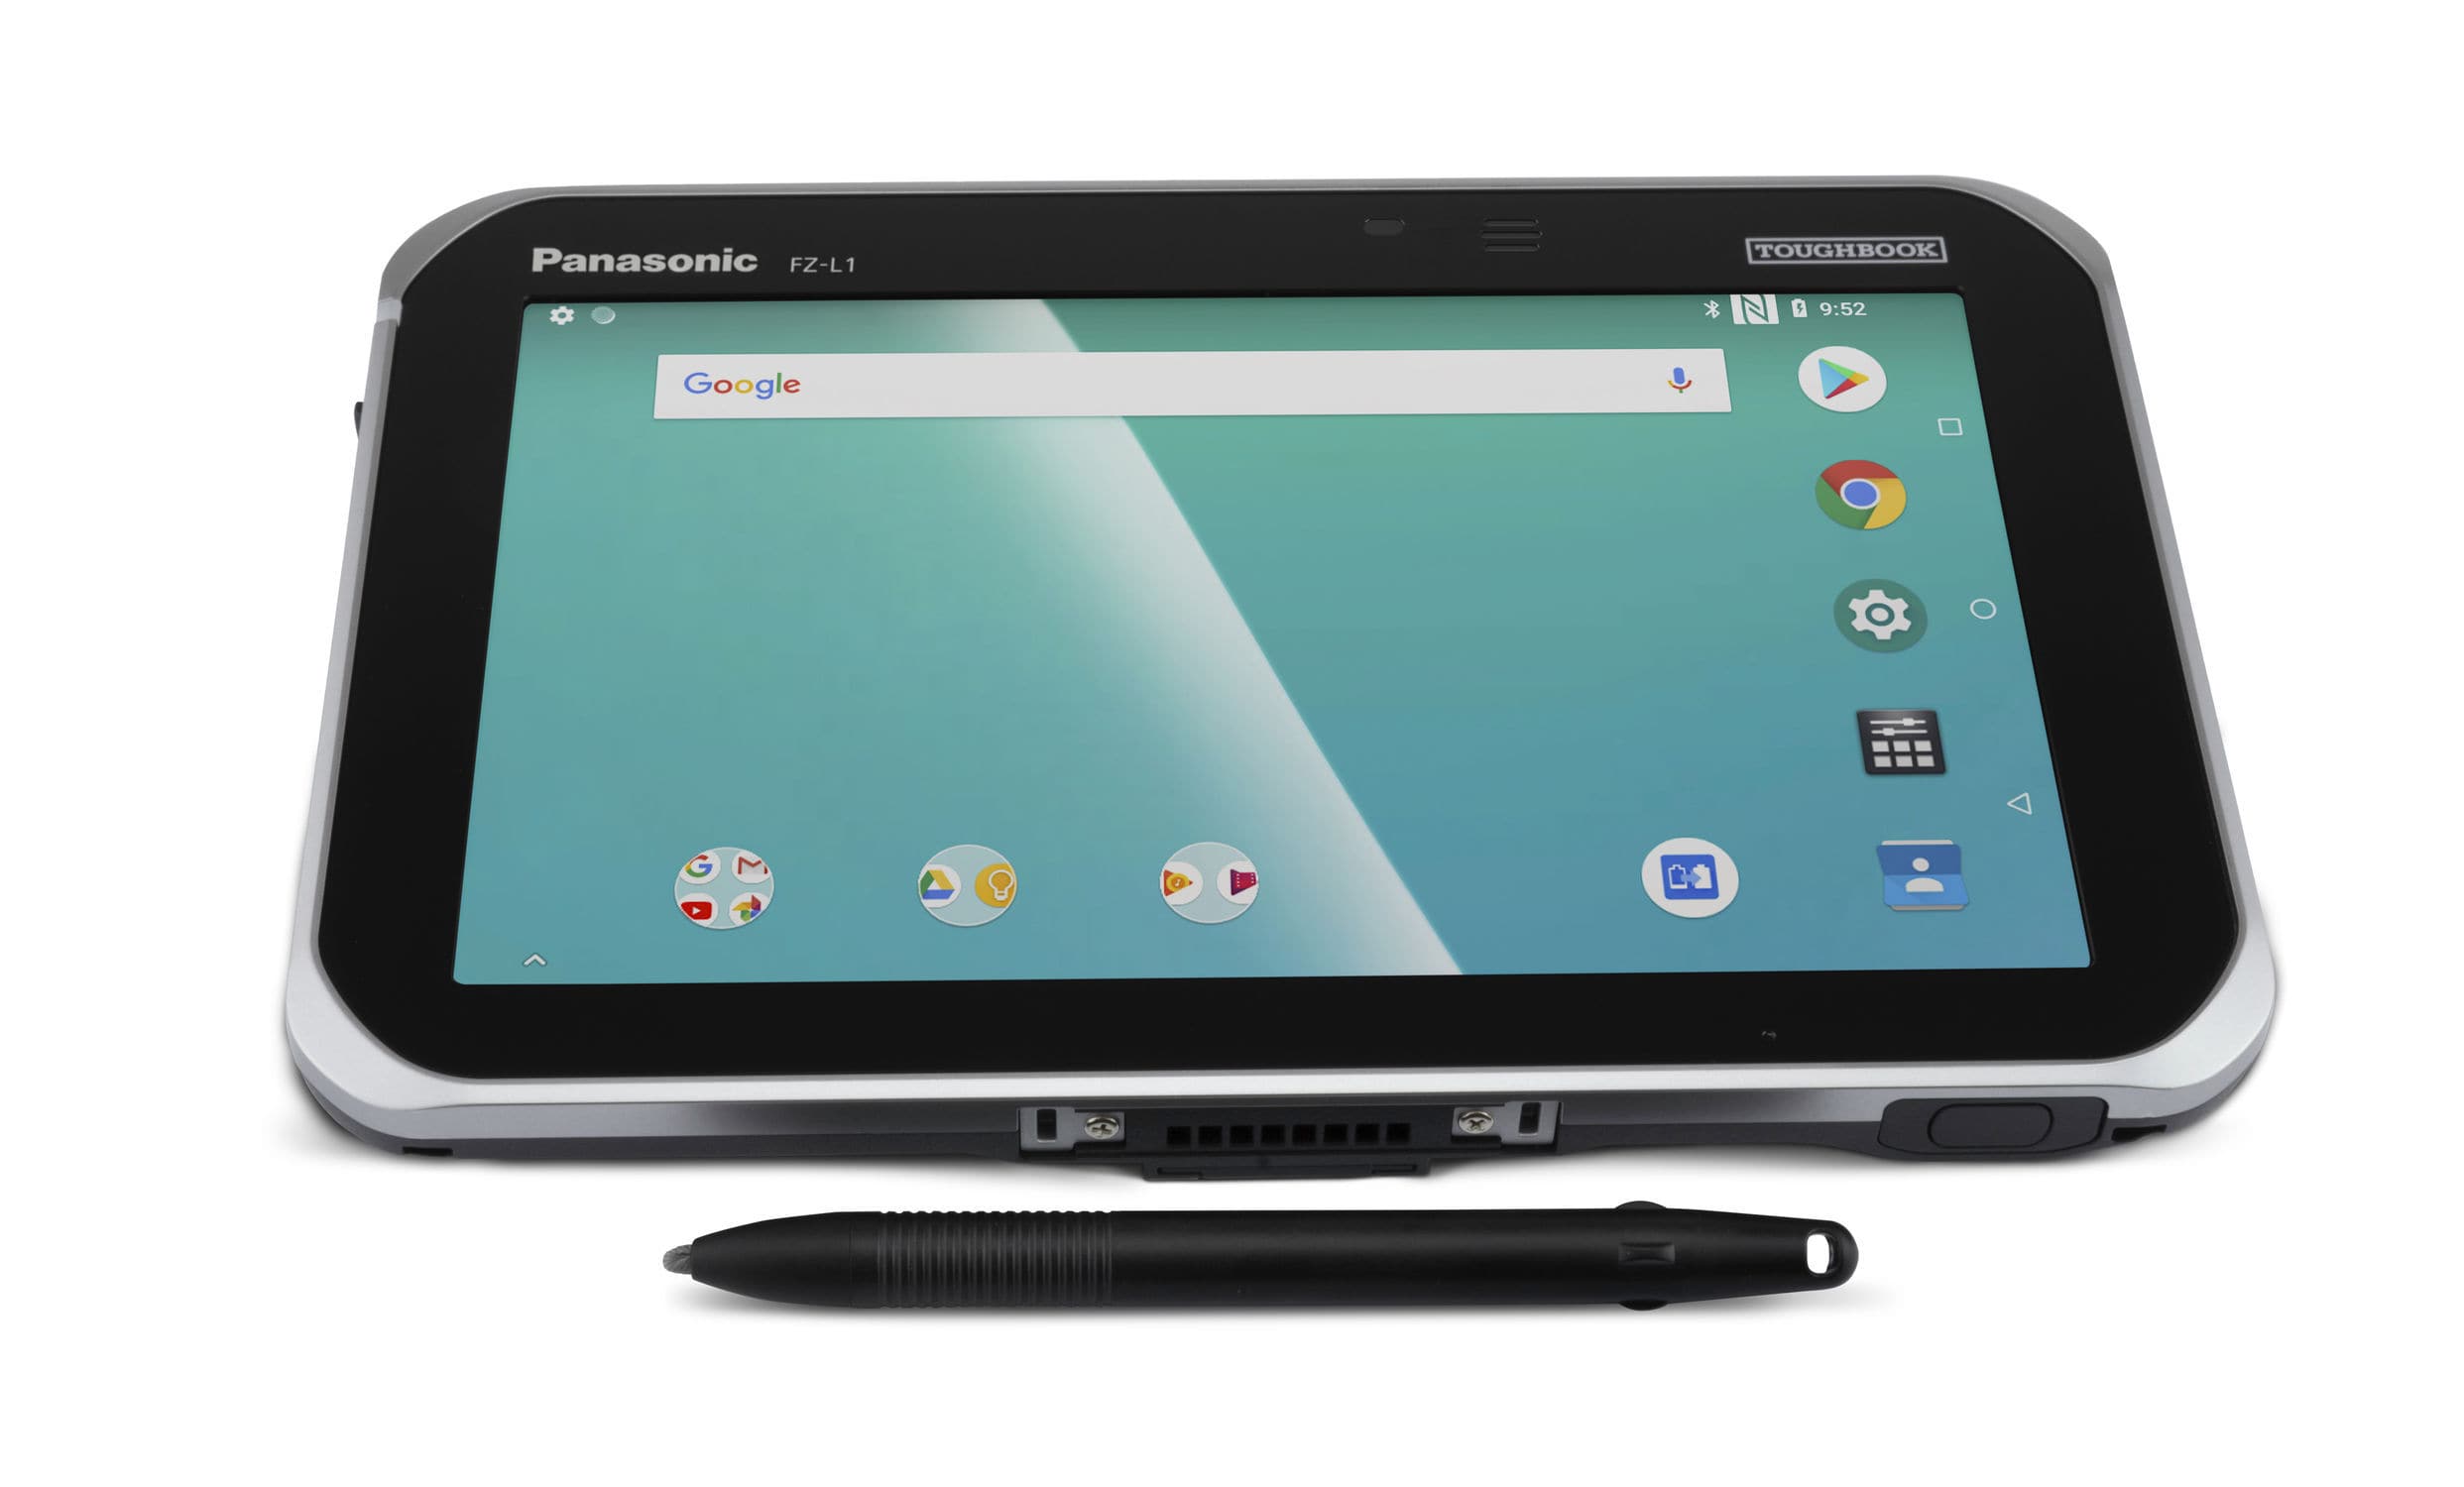 Best rugged smartphones and tablets for construction in 2021 - Panasonic Toughbook